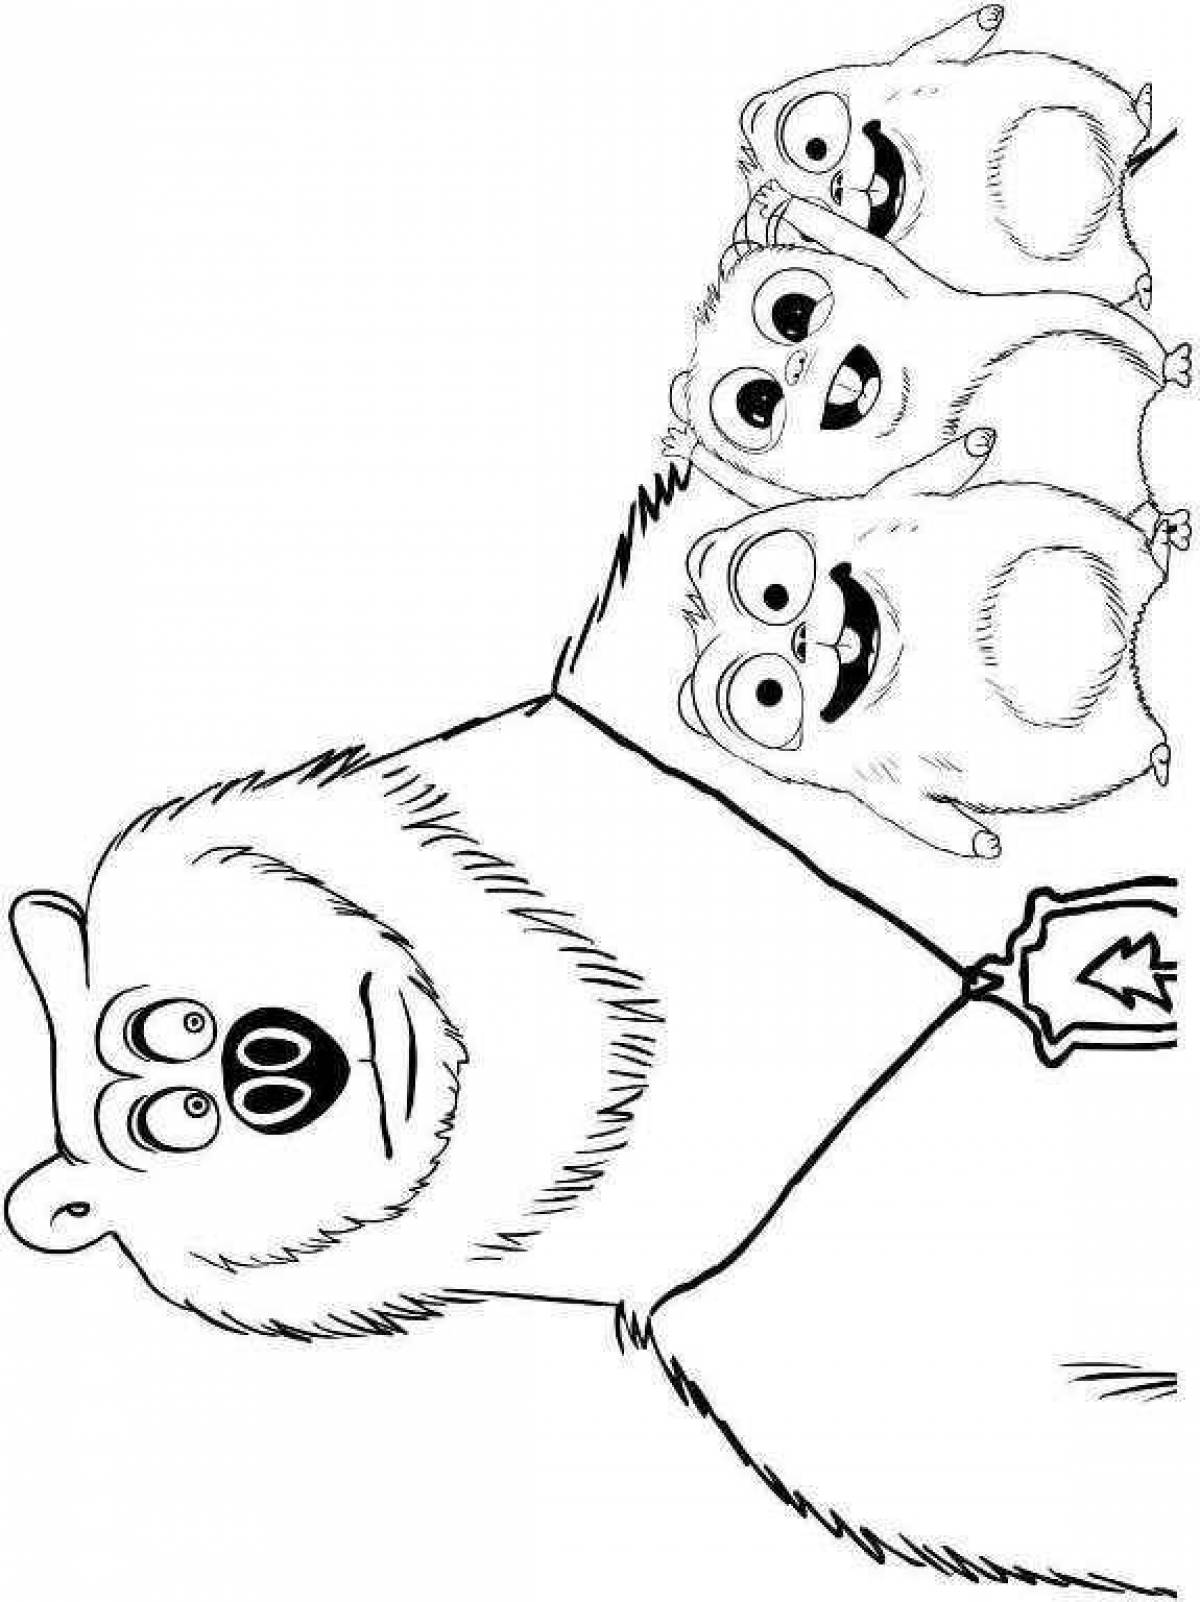 Fabulous grizzlies and lemmings coloring page